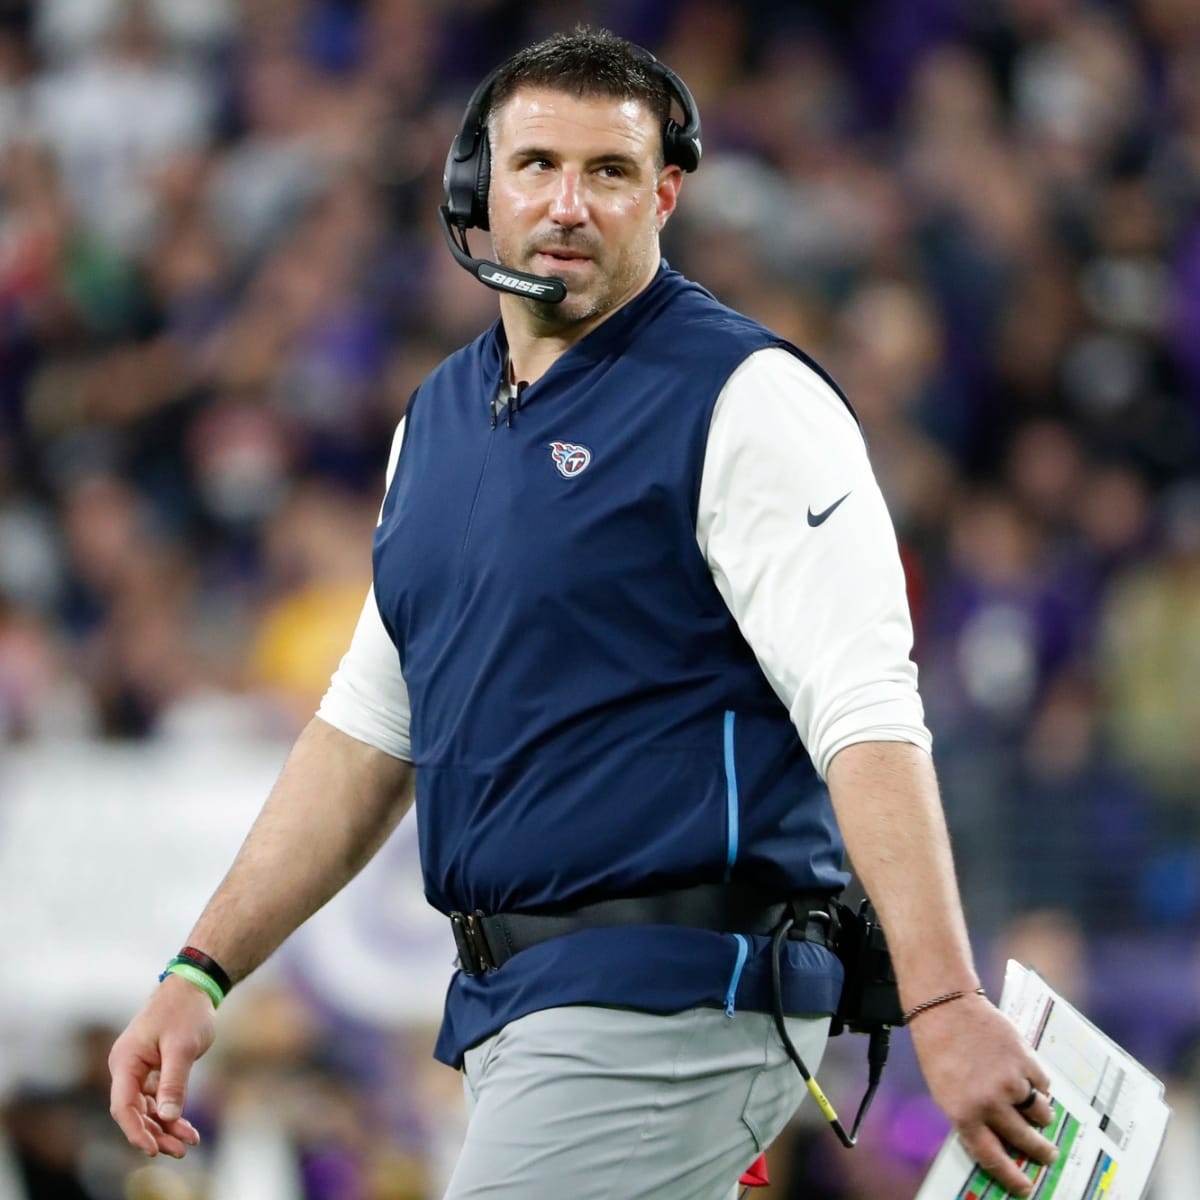 Morning sports update: Mike Vrabel credited his 'good friend Tom